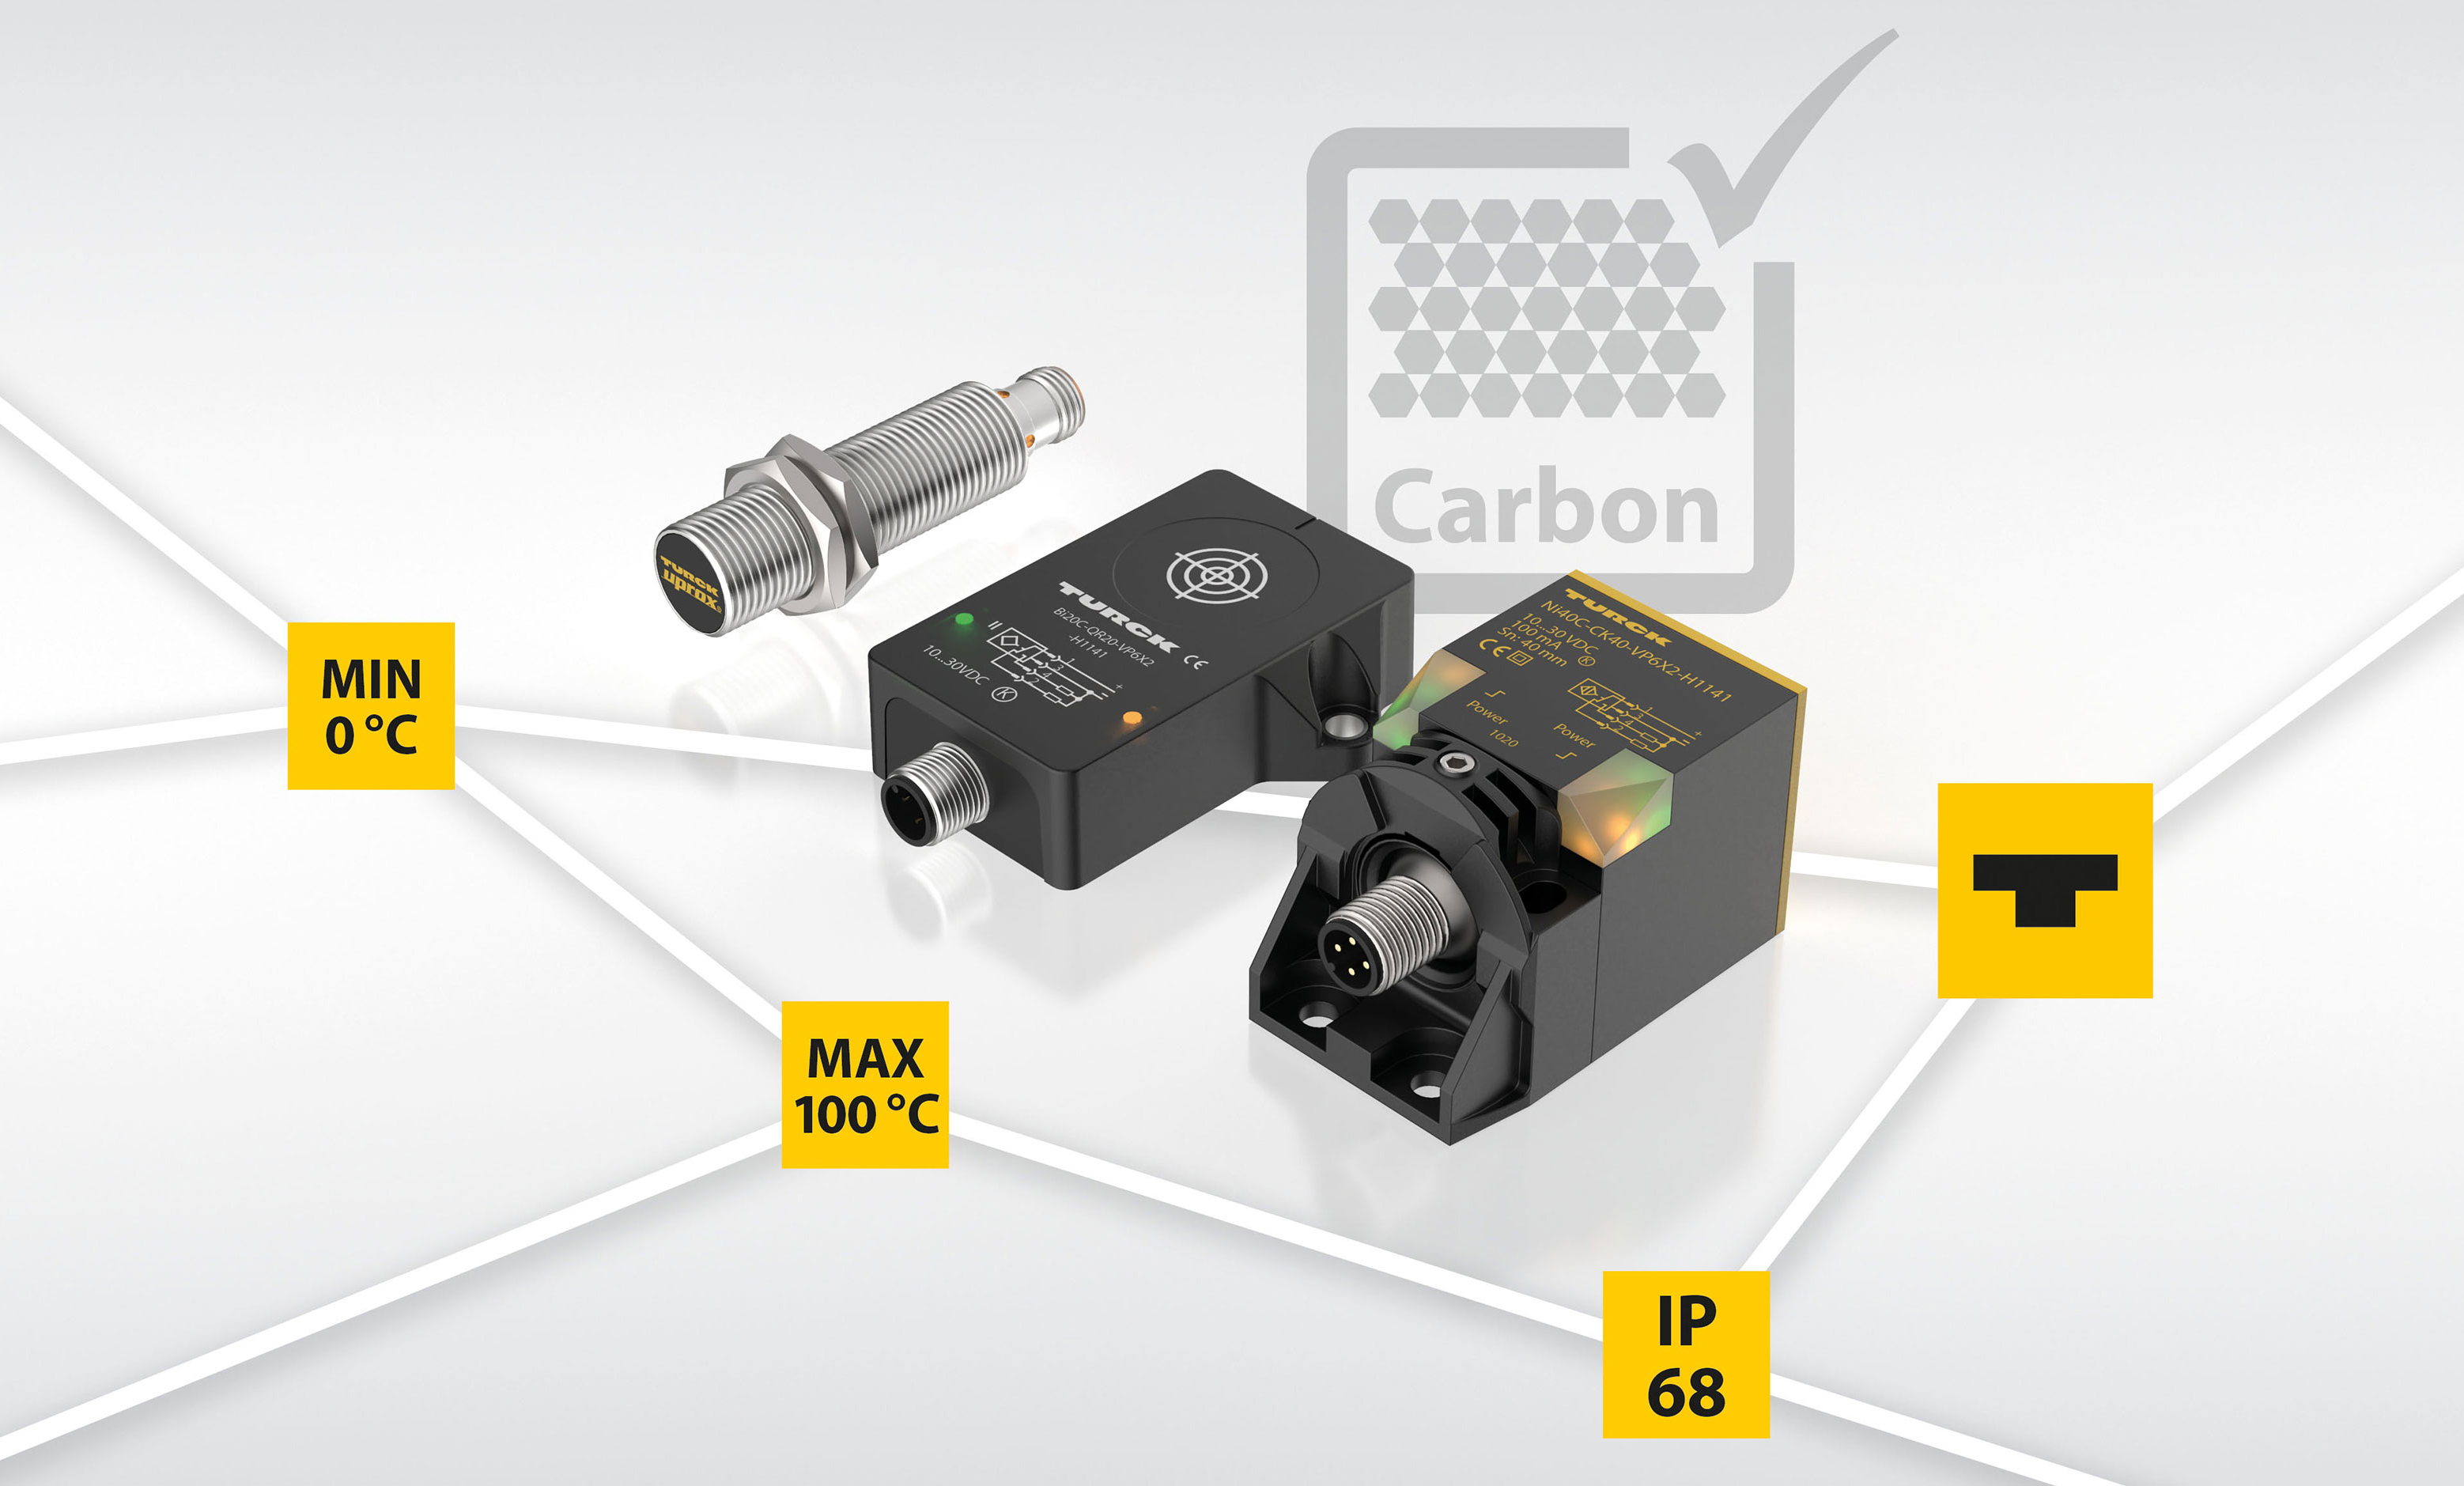 Inductive sensors for CFRP detection